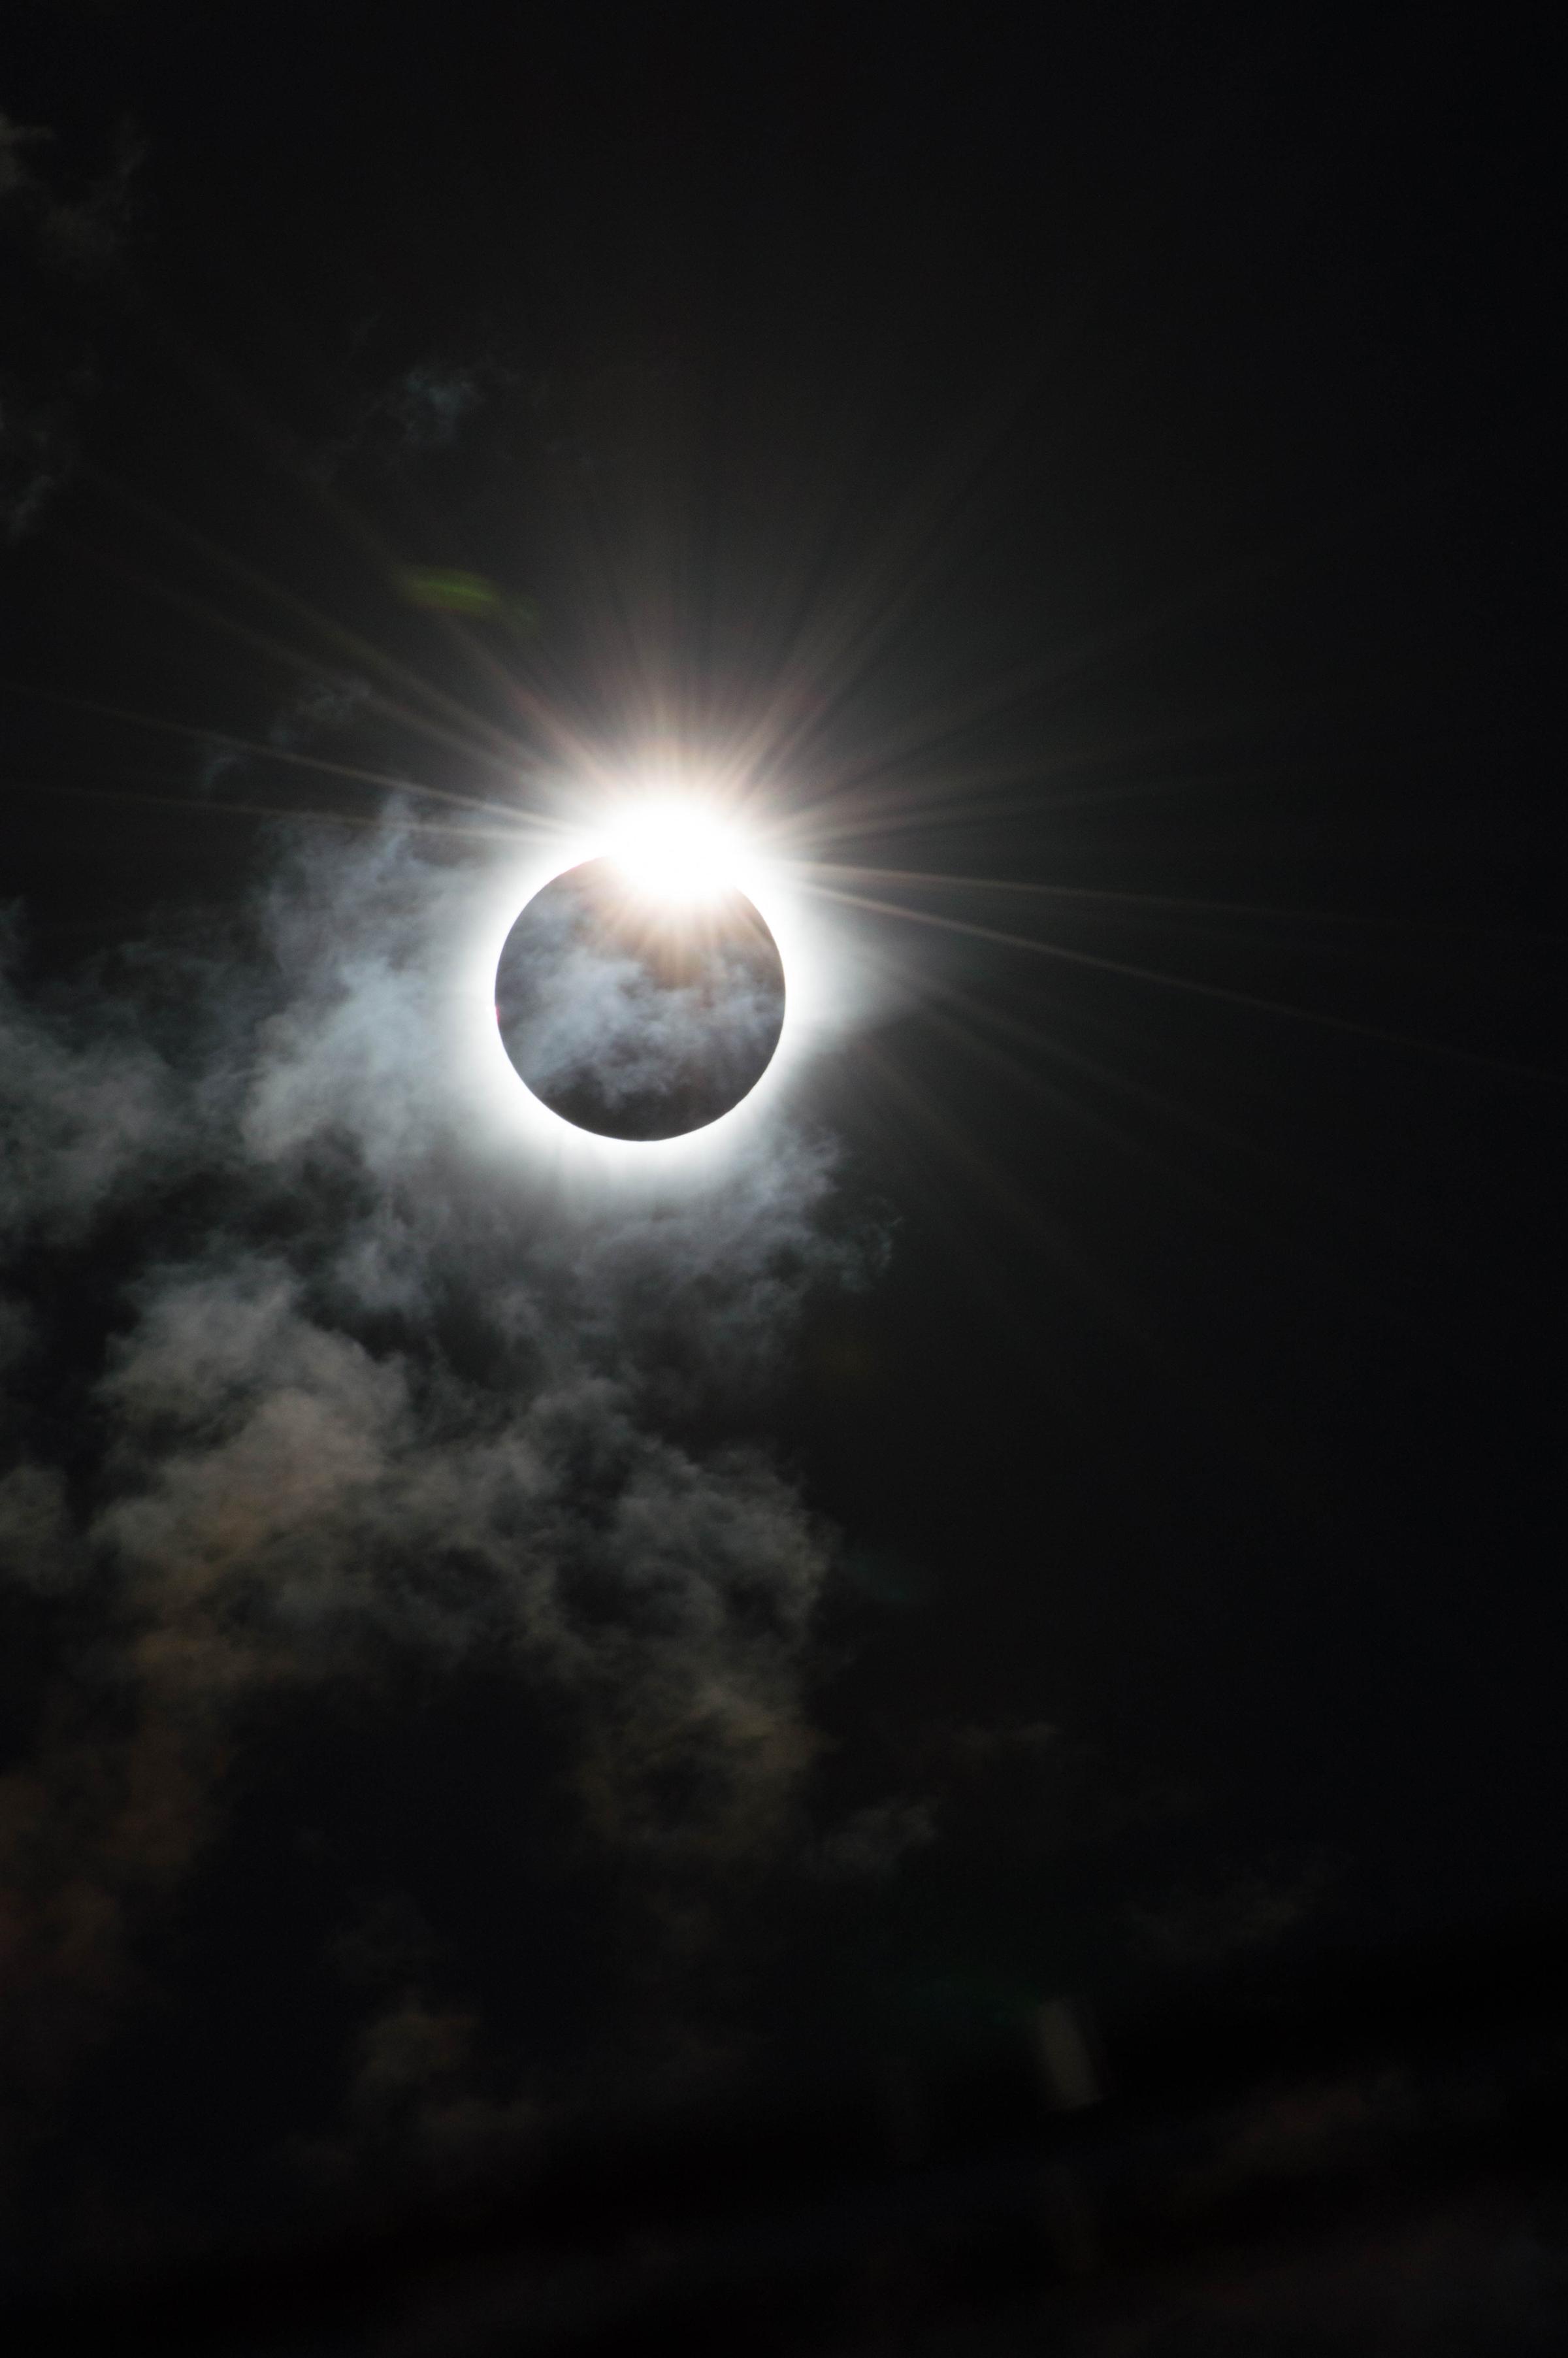 The dramatic moment that our star, the Sun, appears to be cloaked in darkness by the Moon during the total solar eclipse in Indonesia on March 9, 2016.